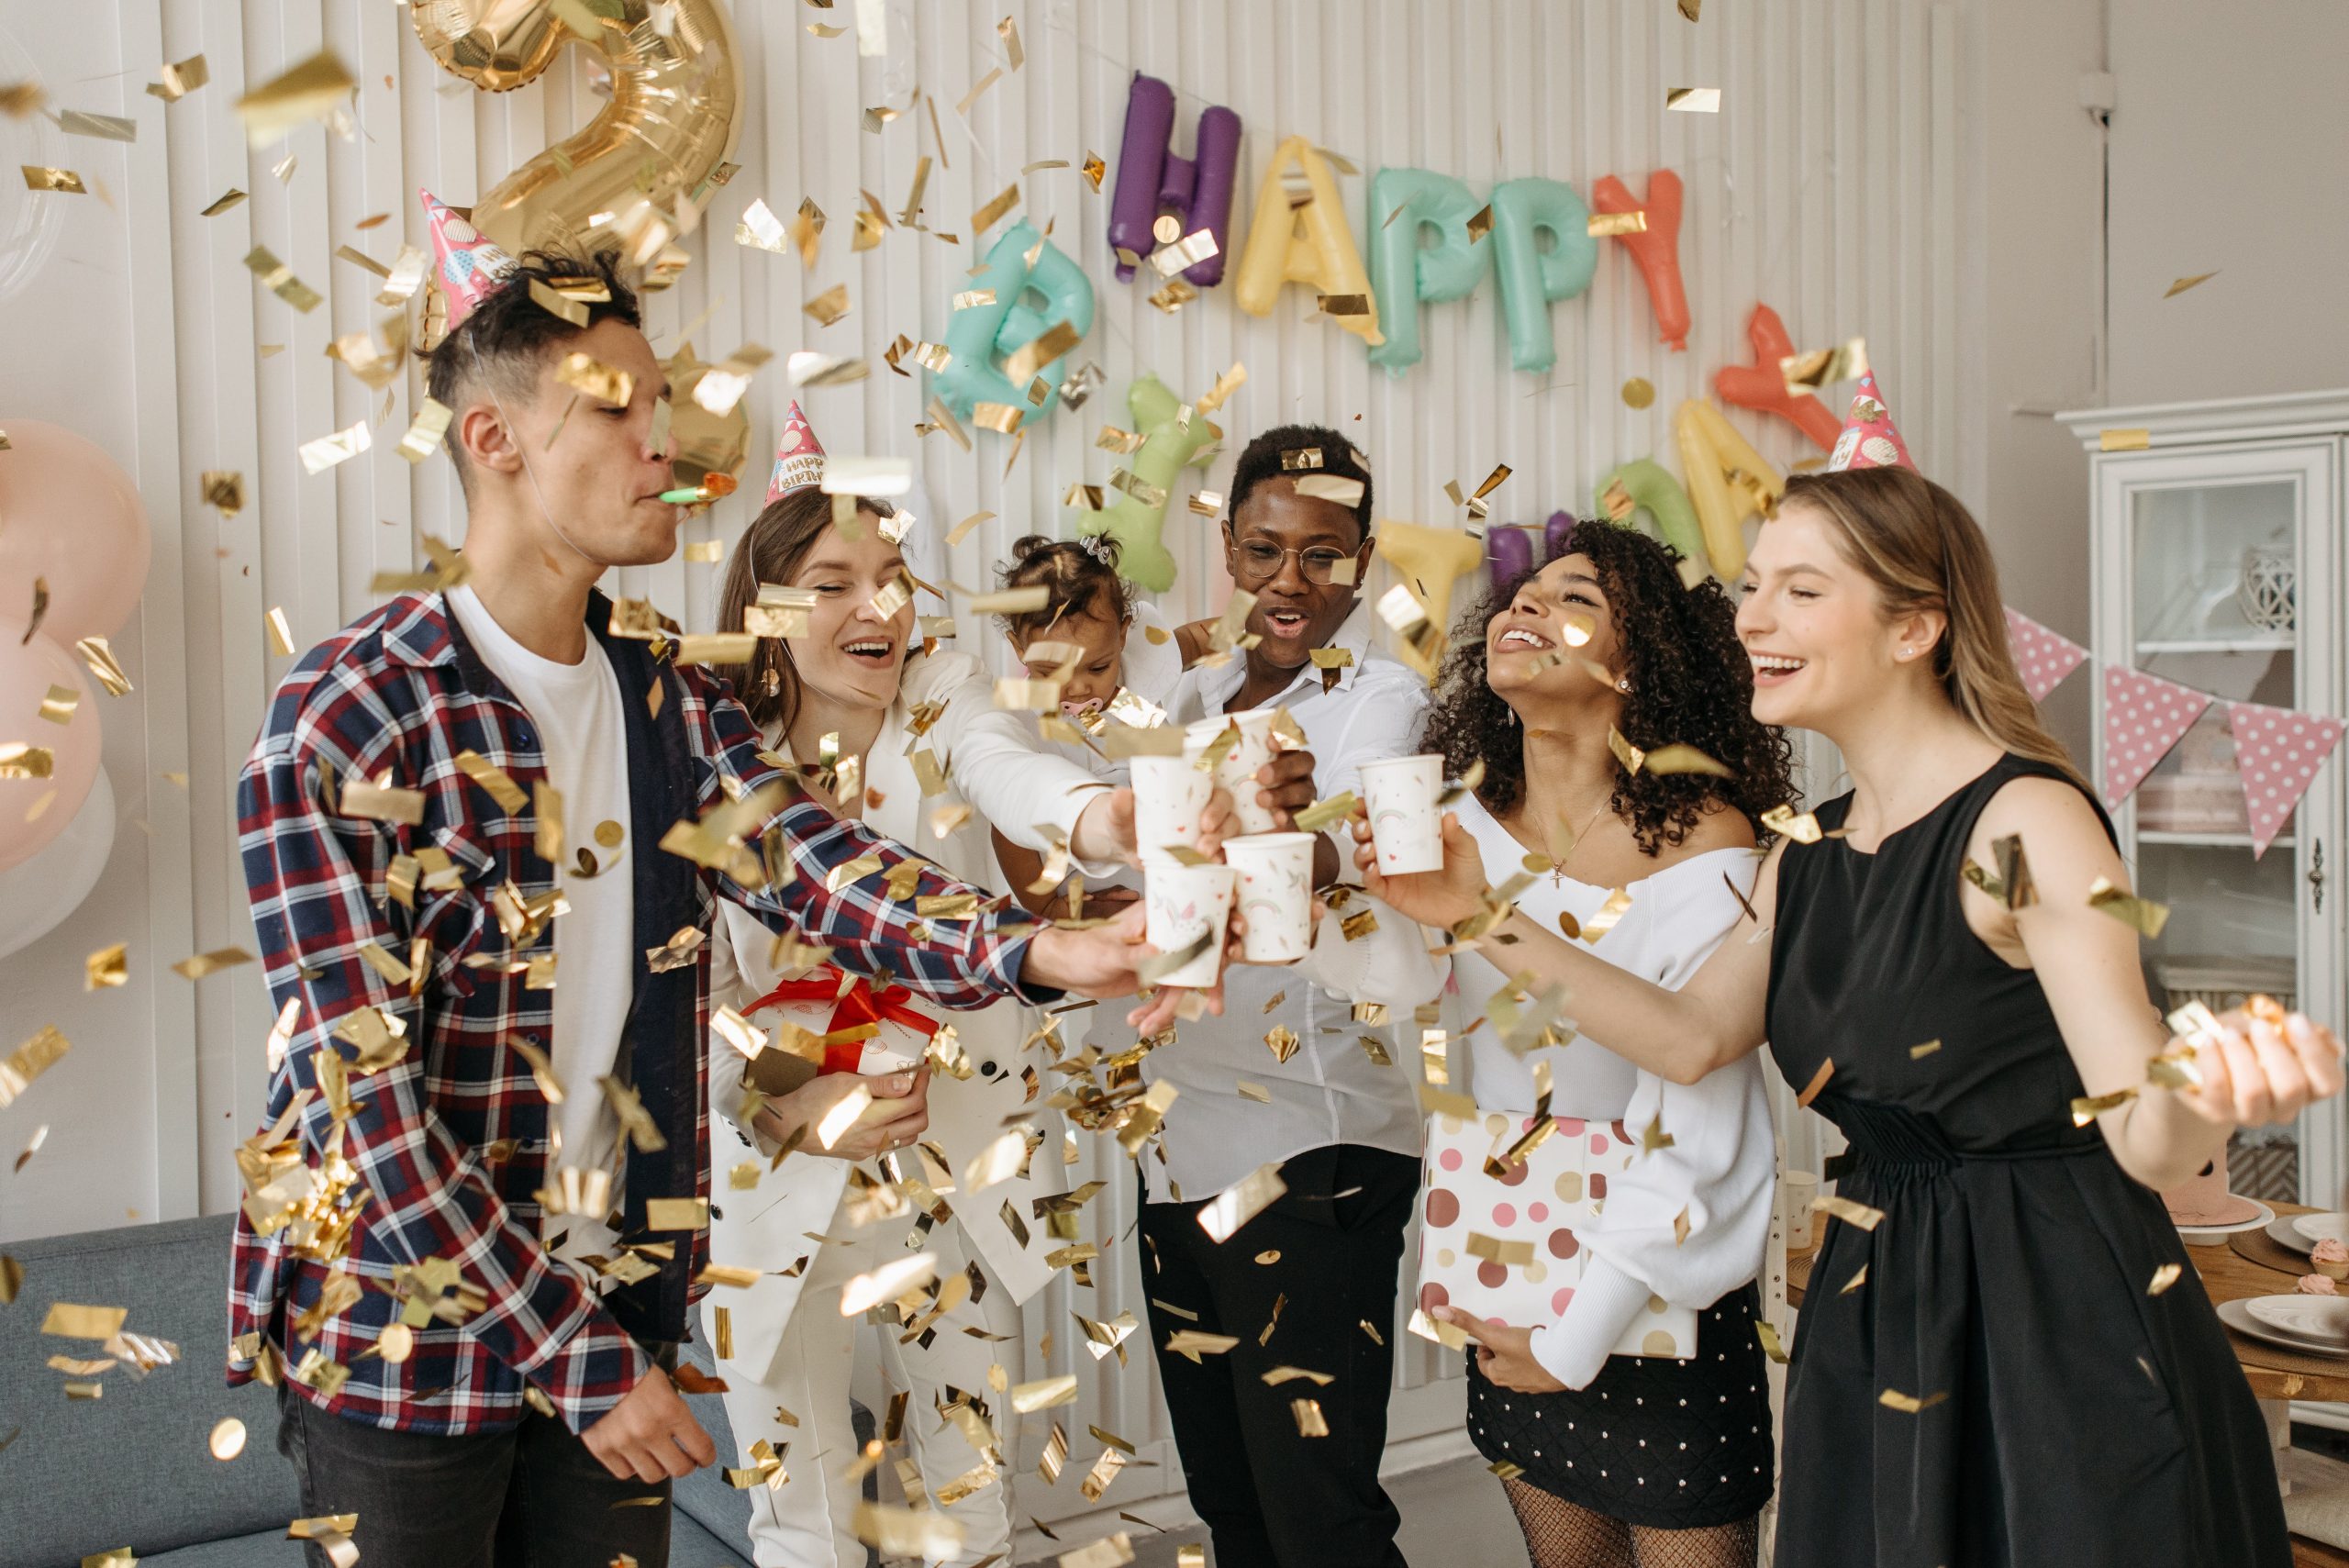 A group of friends celebrating a birthday with confetti at a Texas party rental.